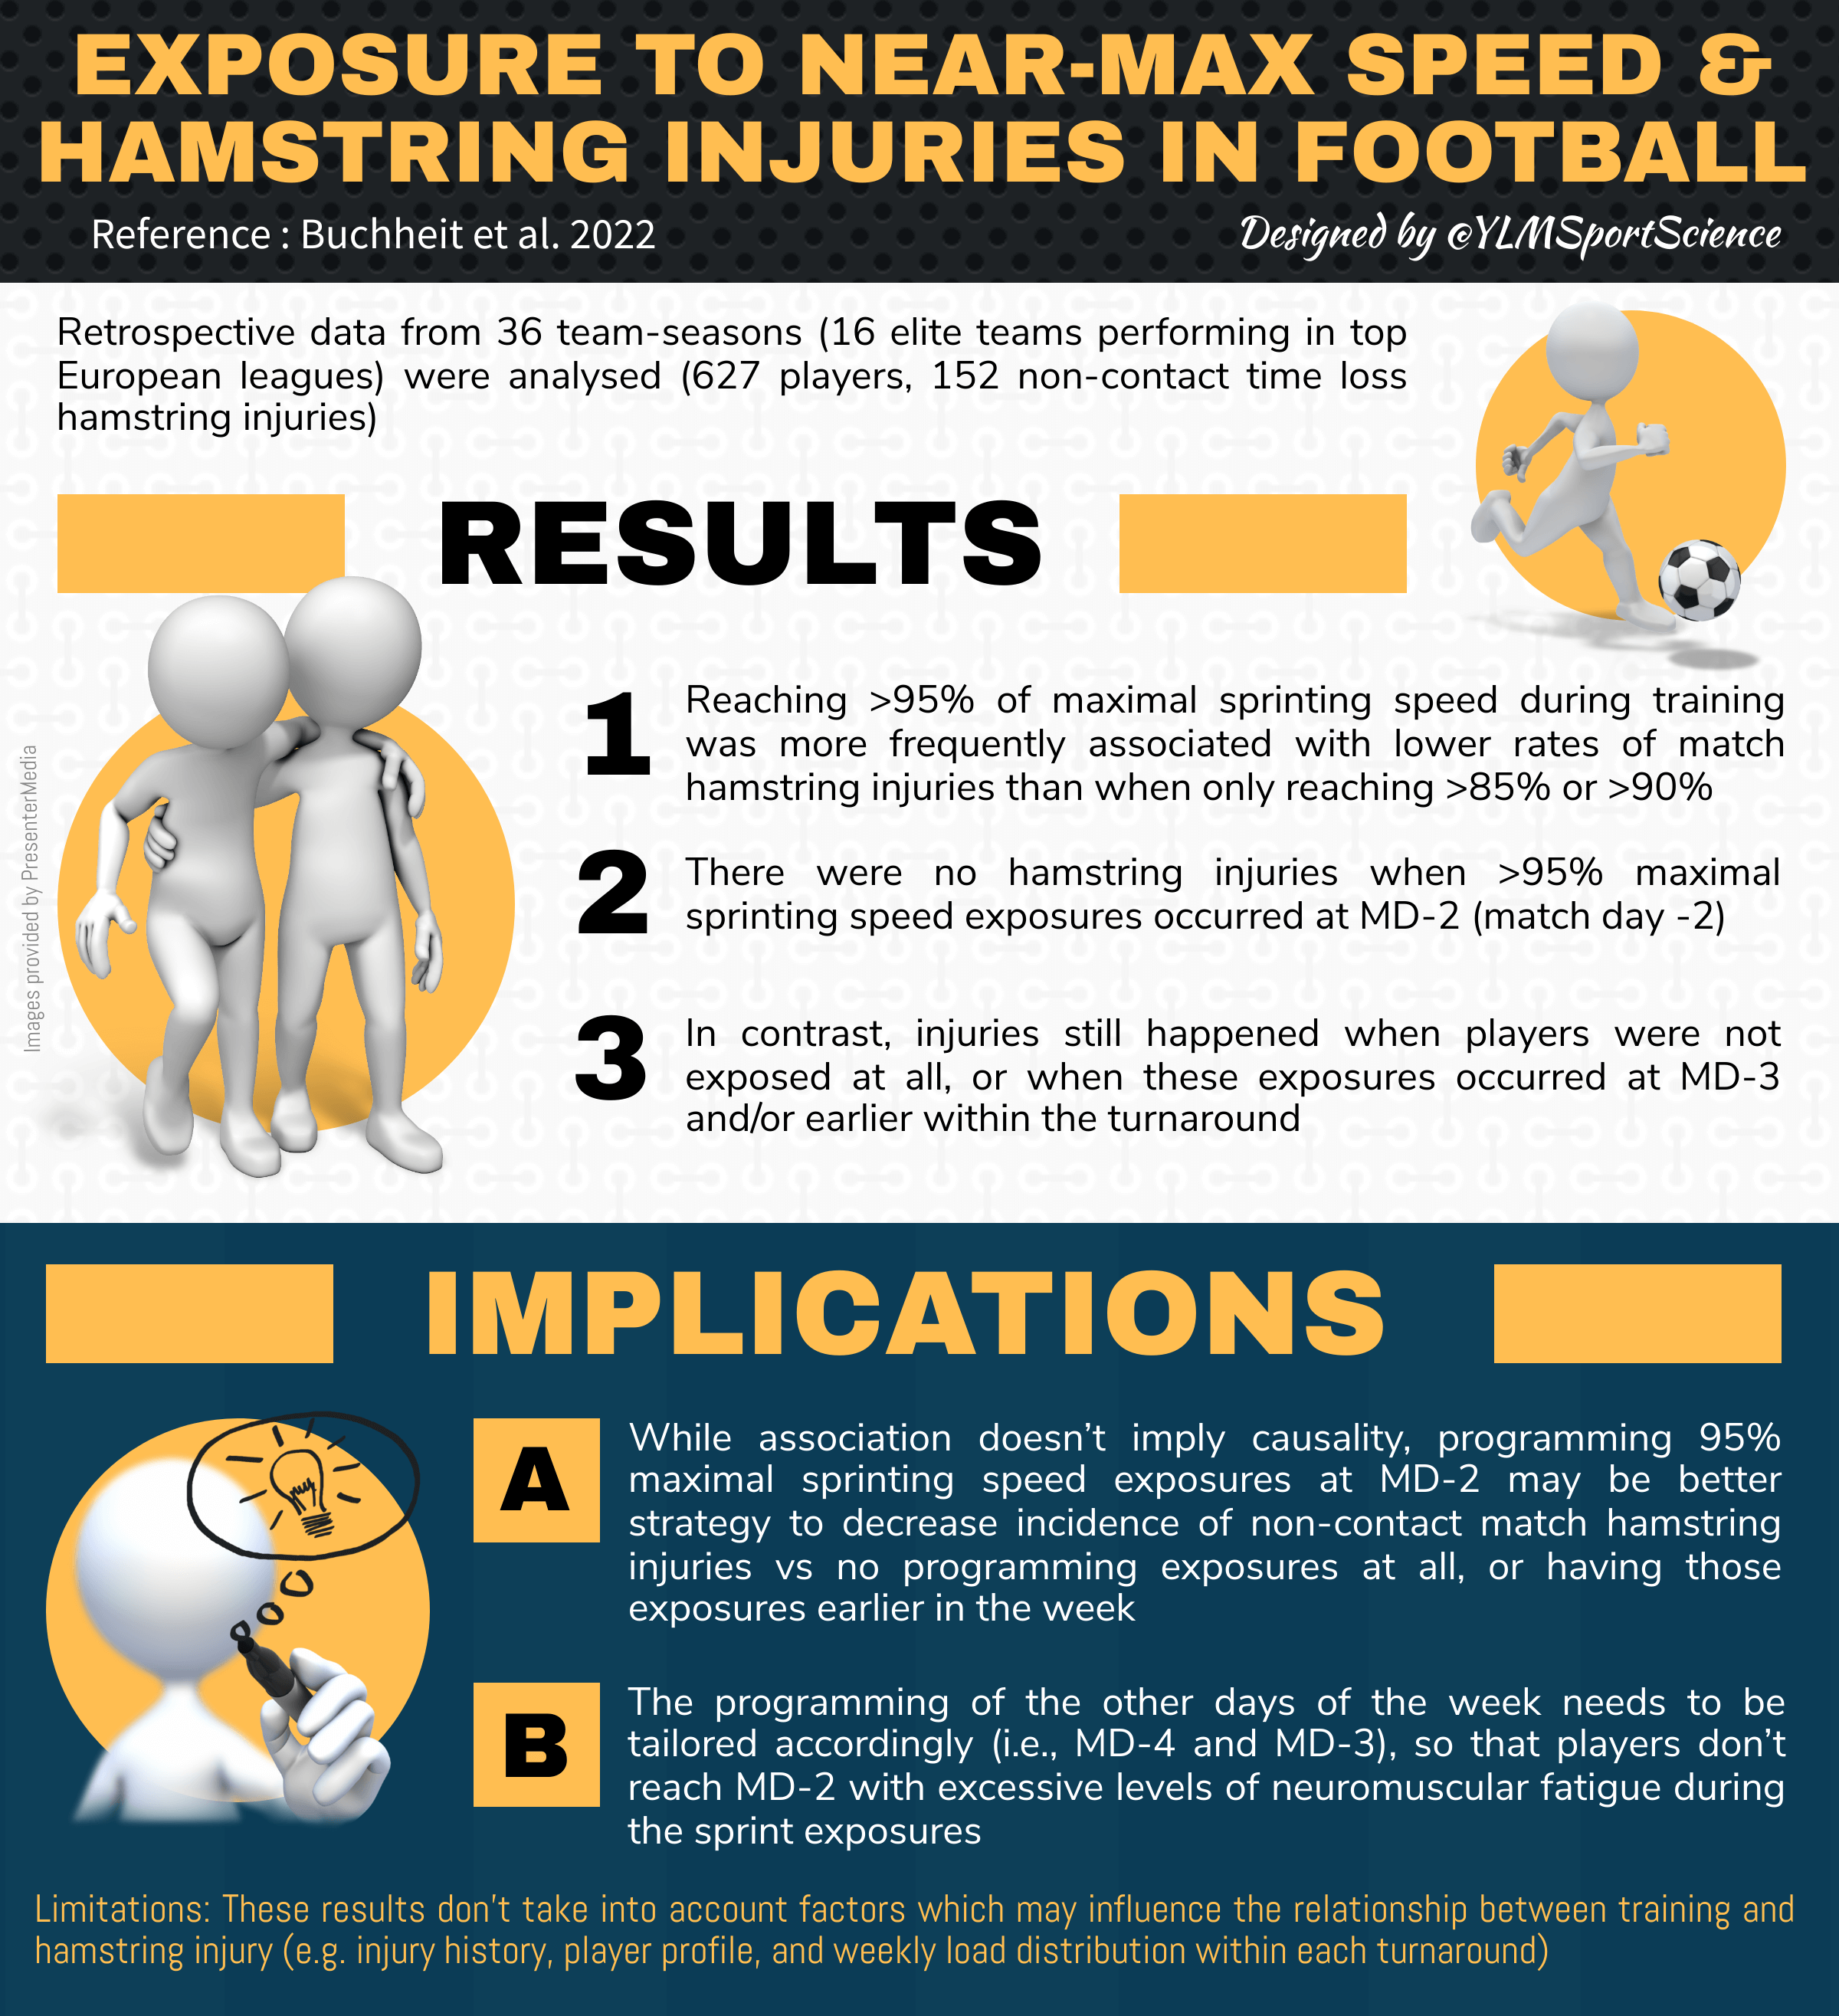 Exposures to near-to-maximal speed running & match hamstring injuries in football